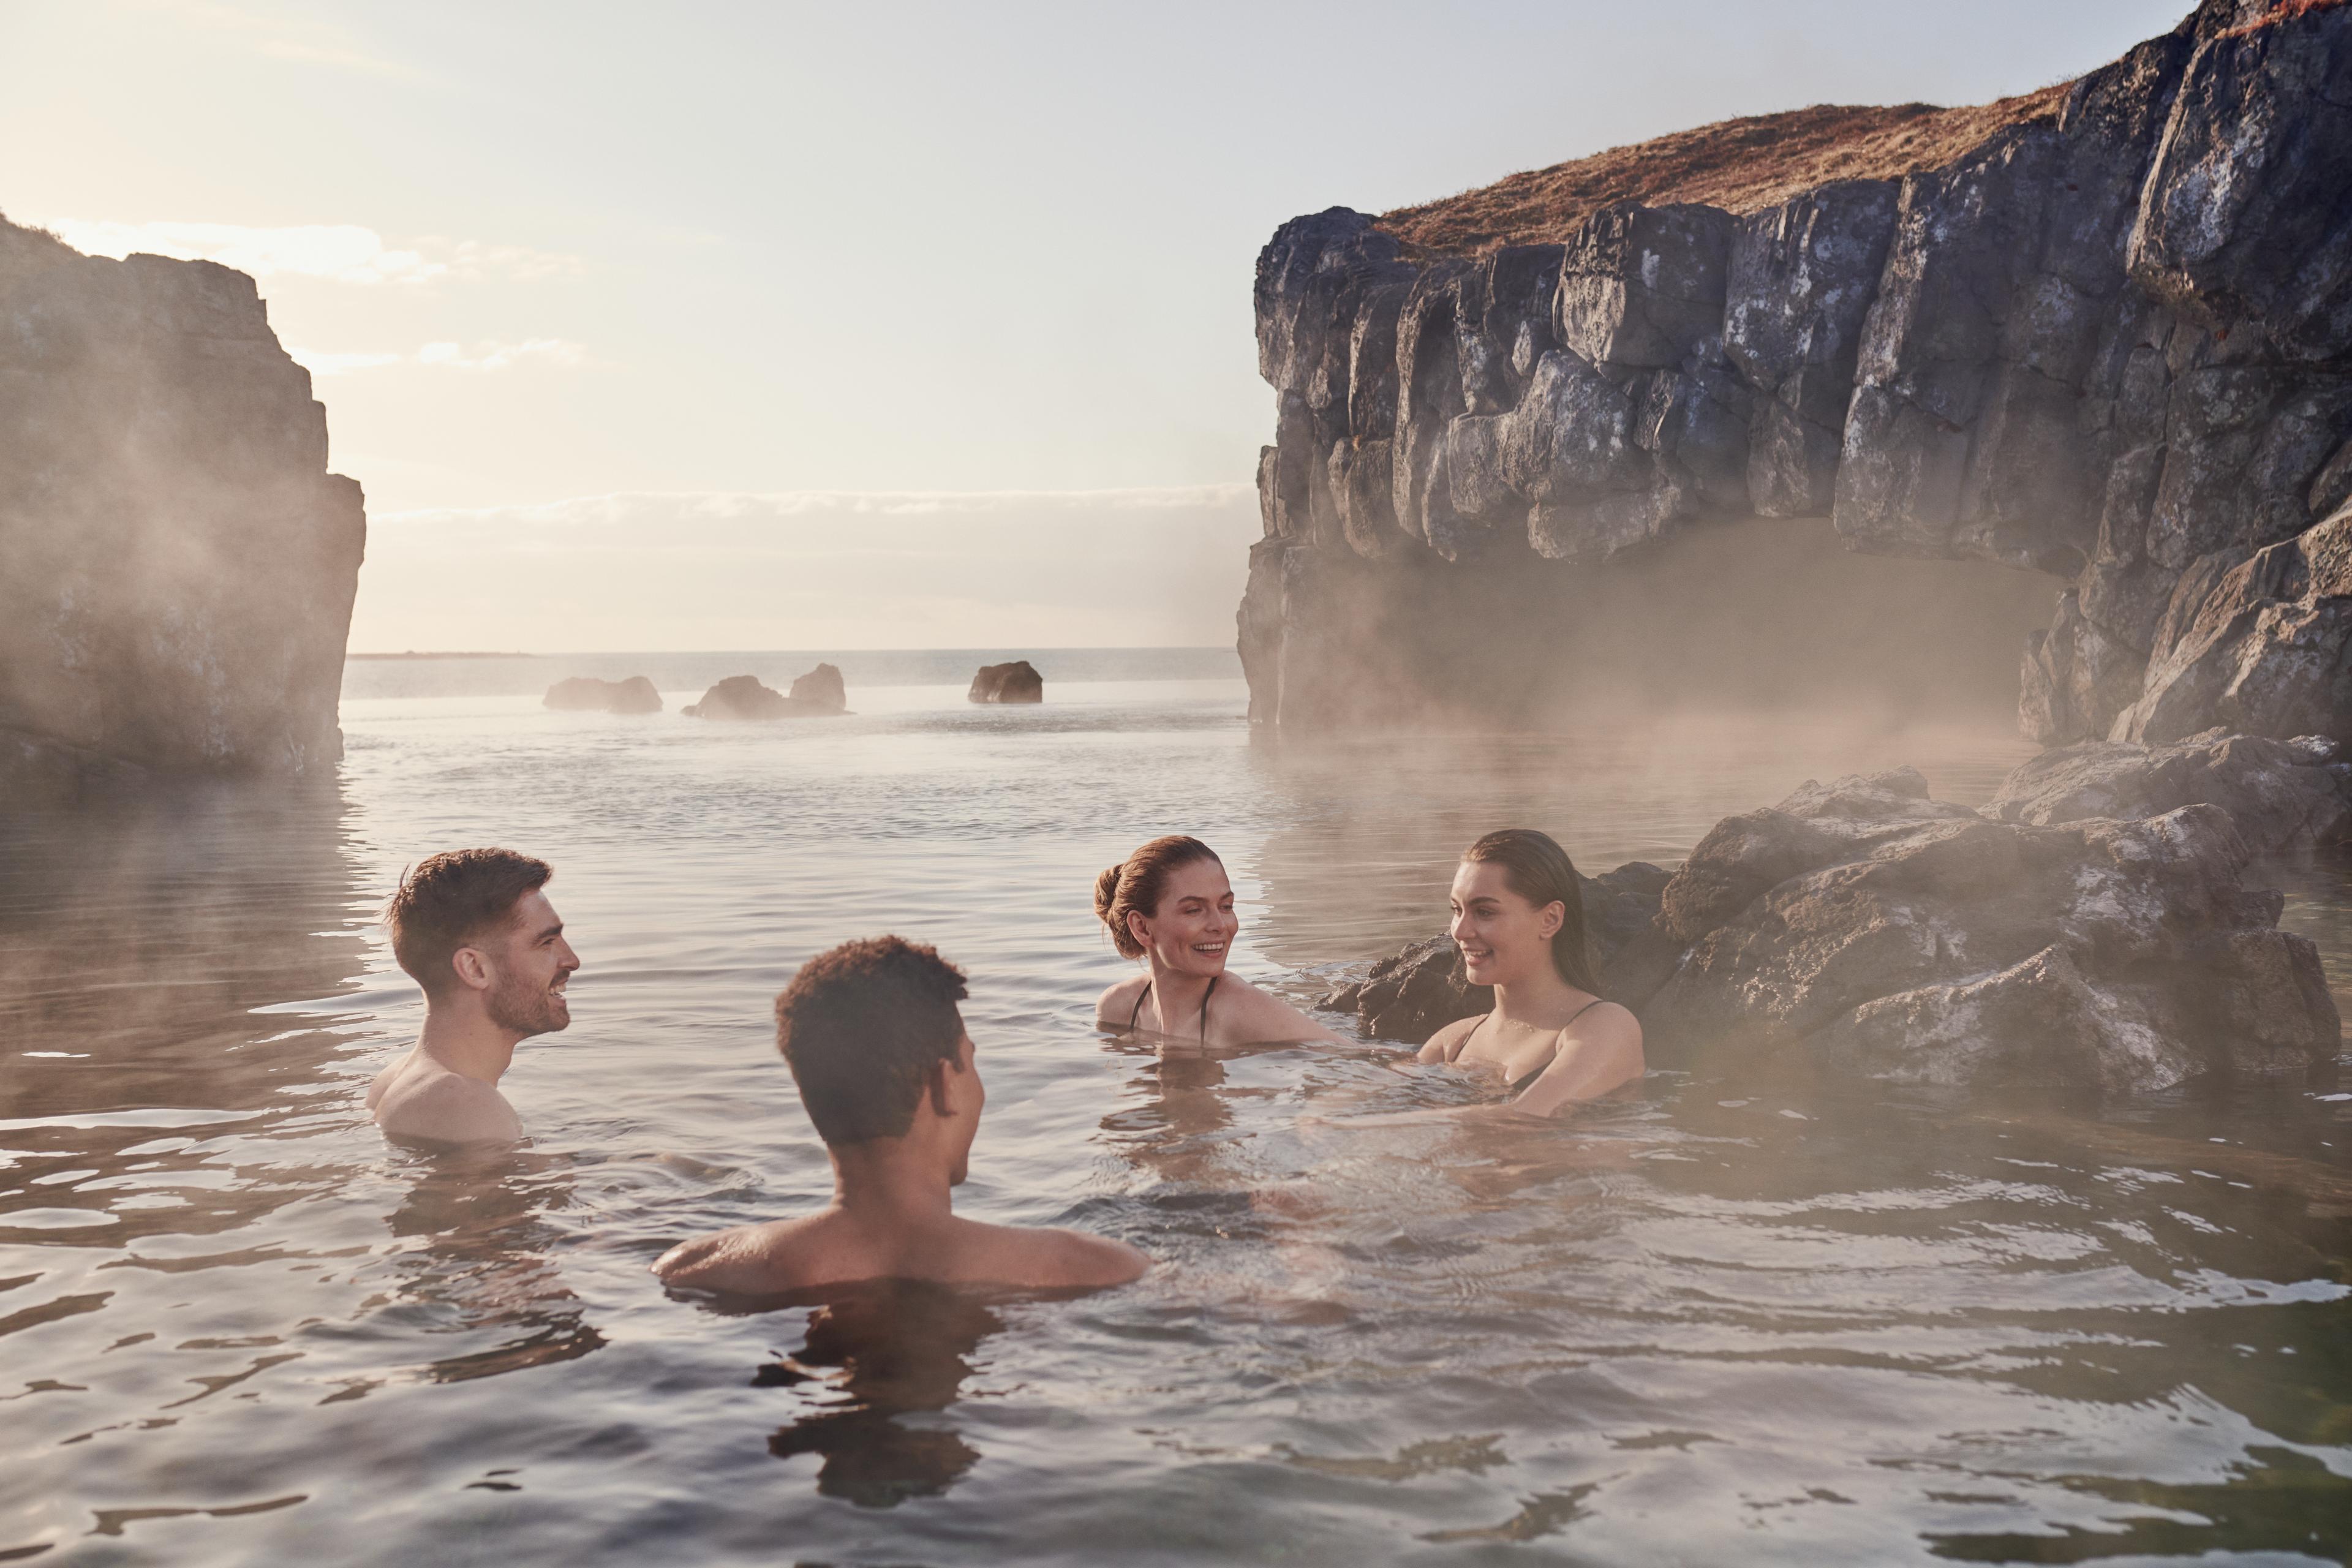 Hot springs in iceland: Sky Lagoon, a Geothermal pool with warm waters in Reykjavik Iceland, the perfect place to see midnight sun.